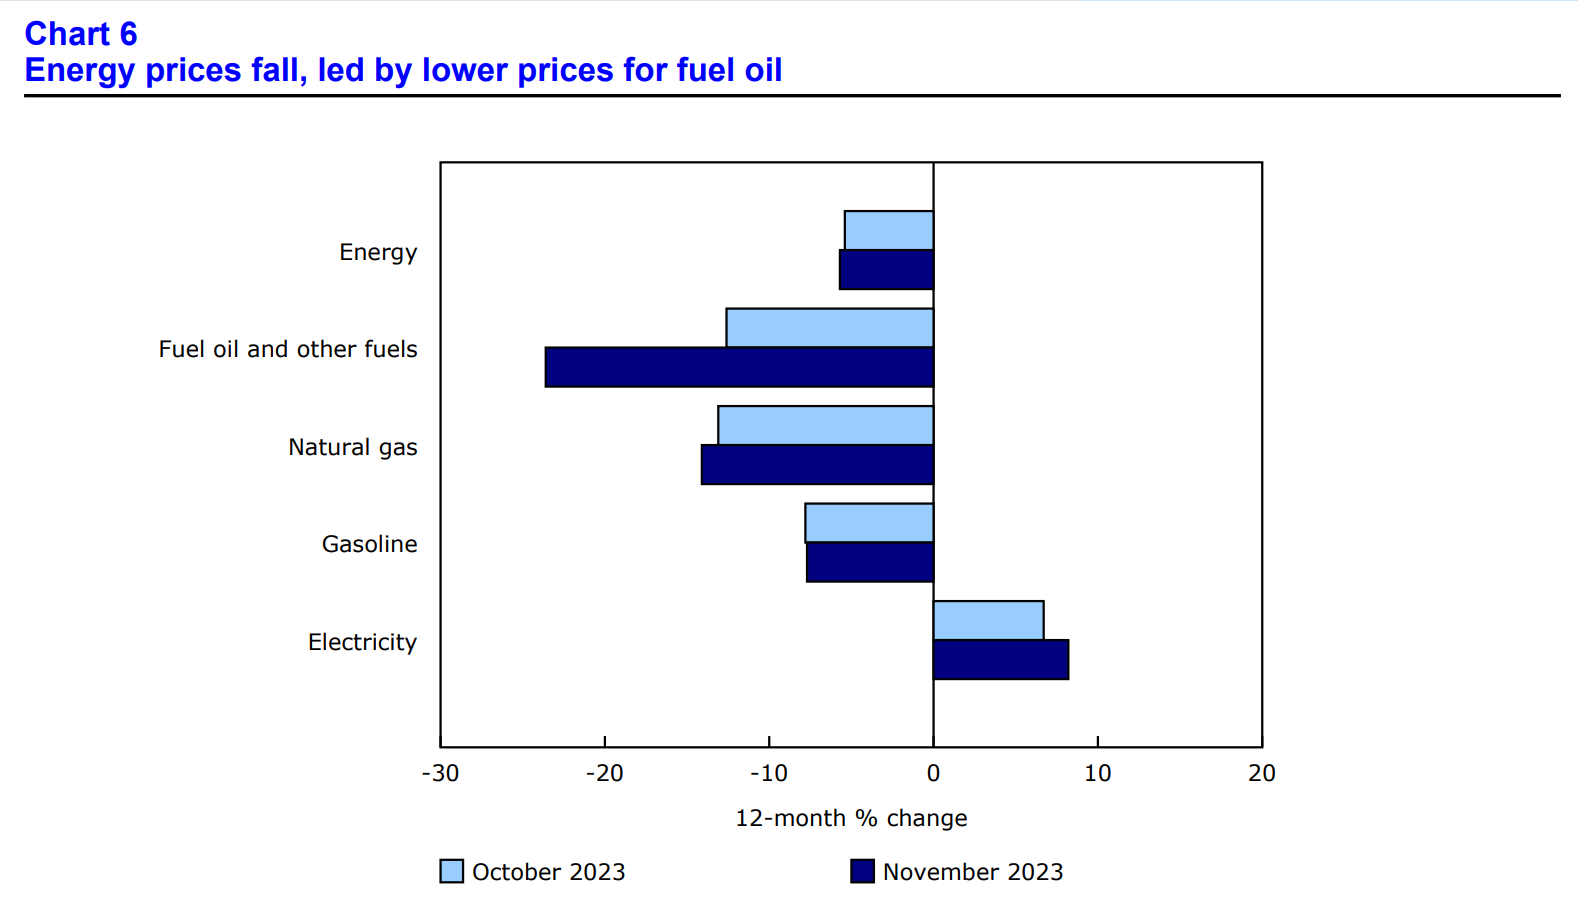 A chart depicting price changes in November 2023 in the energy sector 